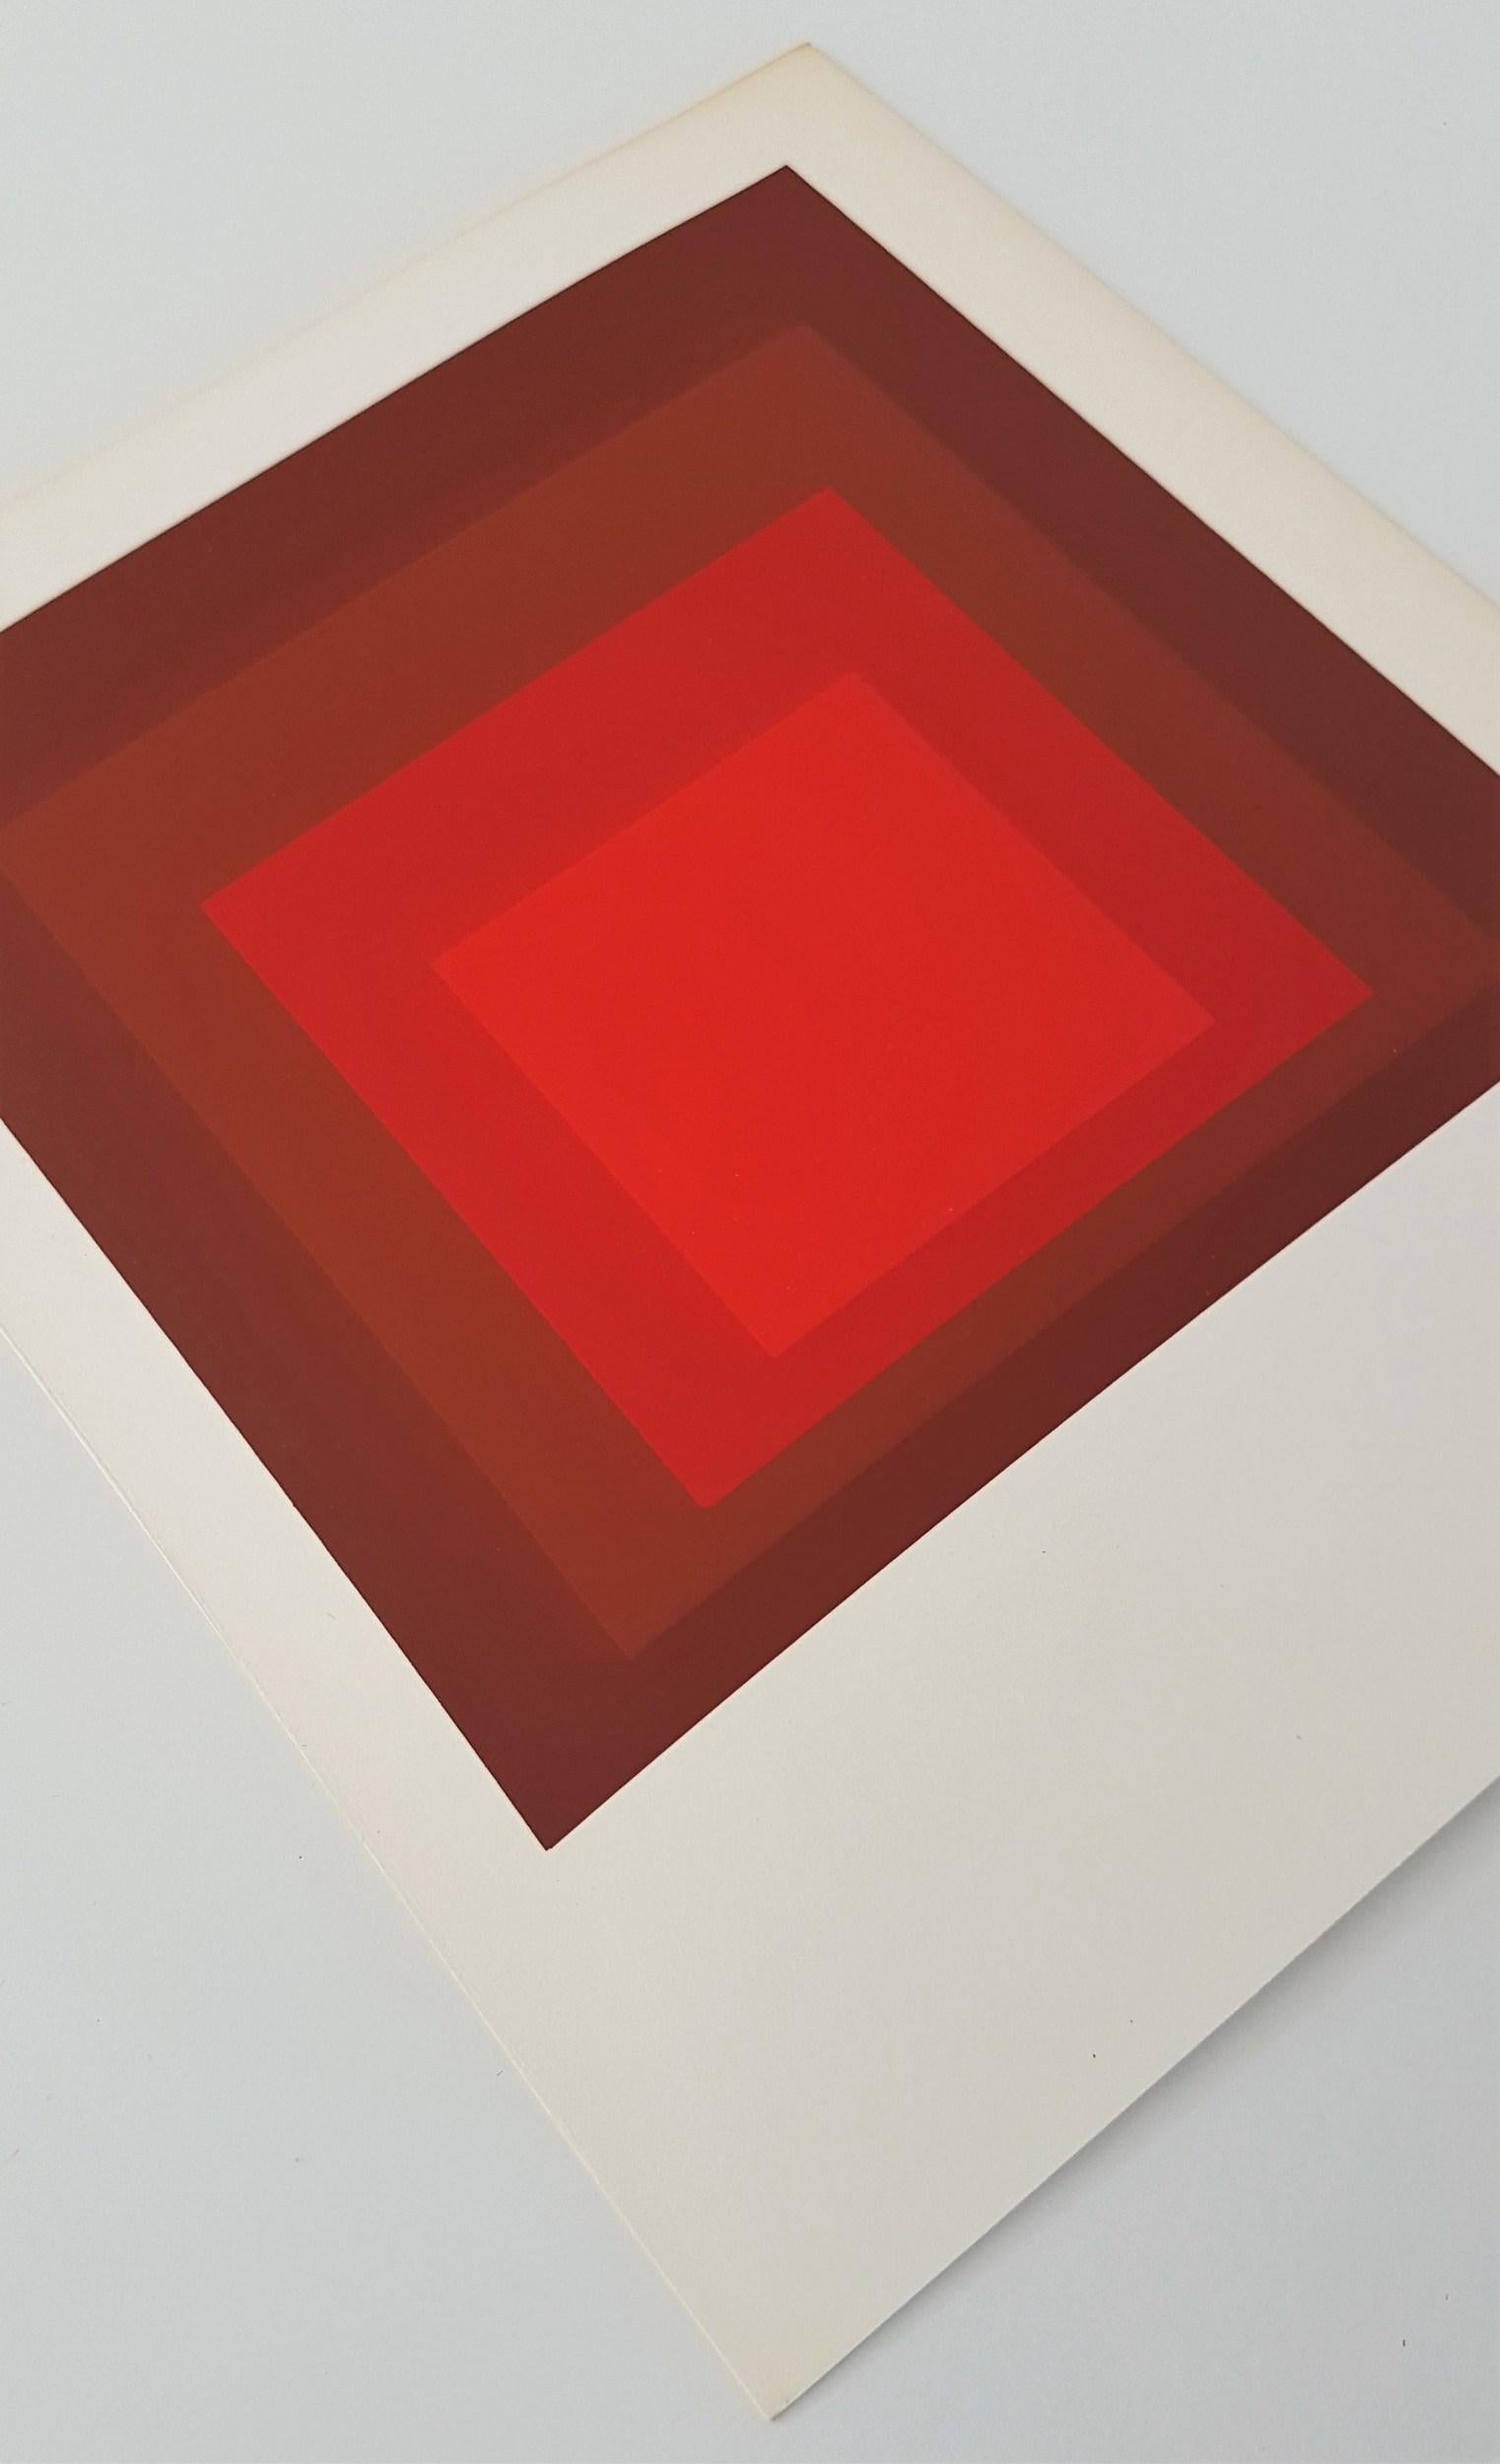 Homage to the Square: R-I D-5 (~28% OFF LIST PRICE - LIMITED TIME ONLY) - Conceptual Print by (after) Josef Albers